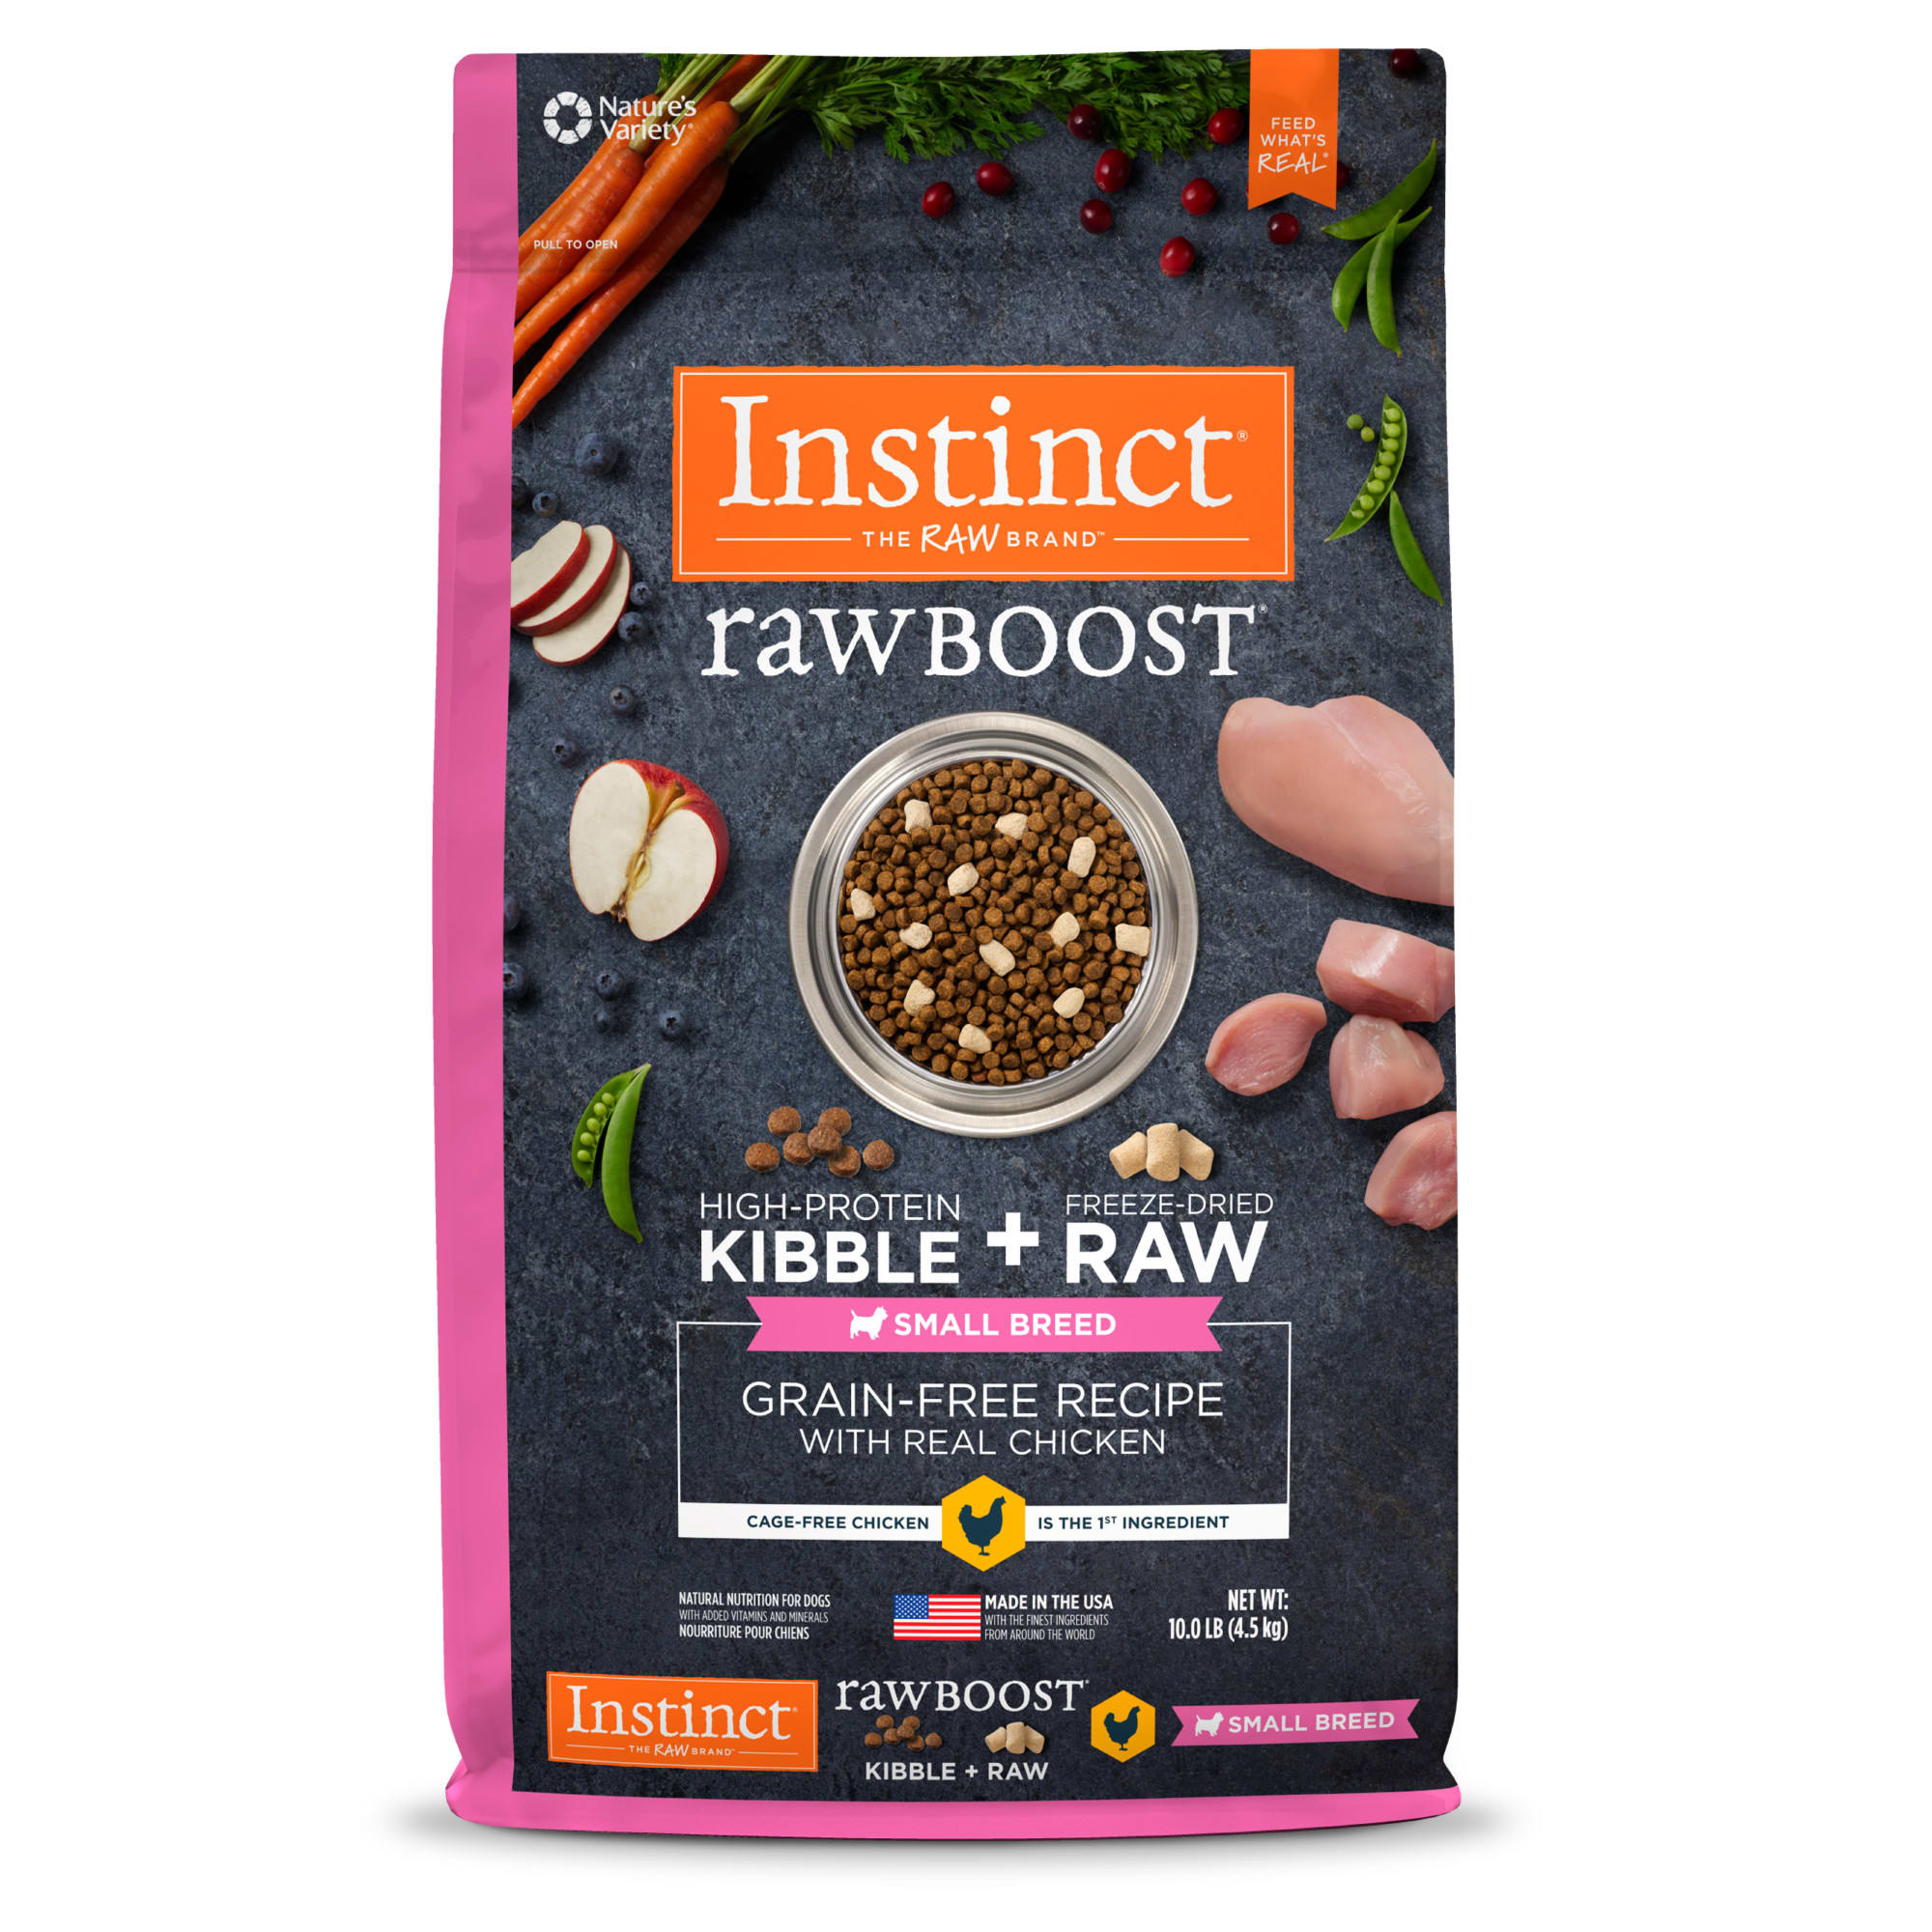 Instinct Raw Boost Small Breed Grain Free Recipe with Real Chicken Natural Dry Dog Food by Nature's Variety, 10 lbs. | Petco